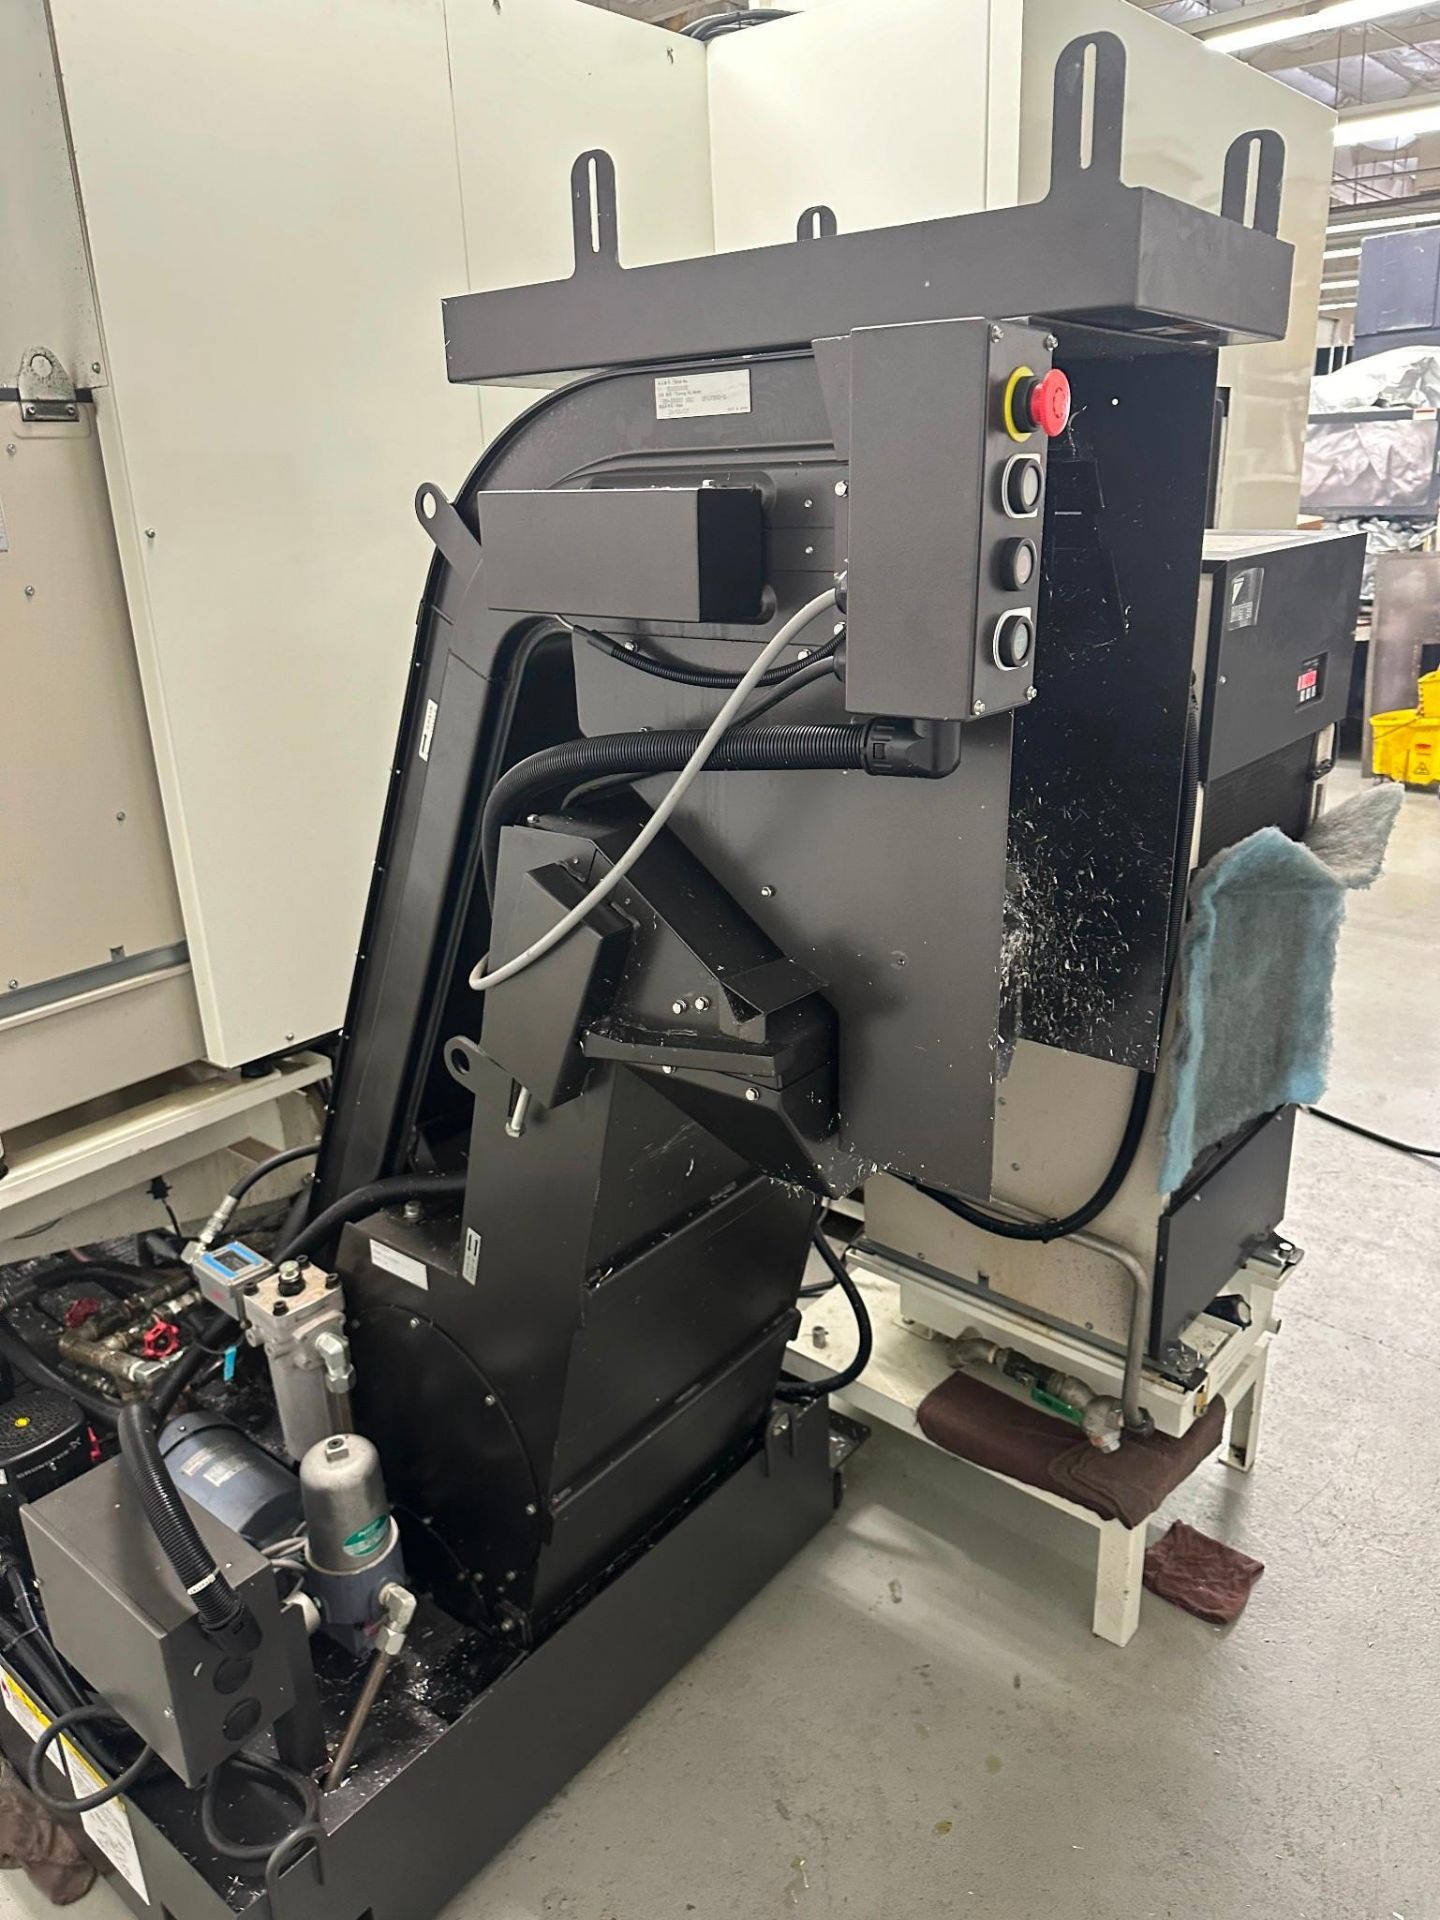 KITAMURA MYCENTER HX400IG HMC, 2018 - FULL 4TH AXIS, CTS, LINEAR SCALES - Image 12 of 17